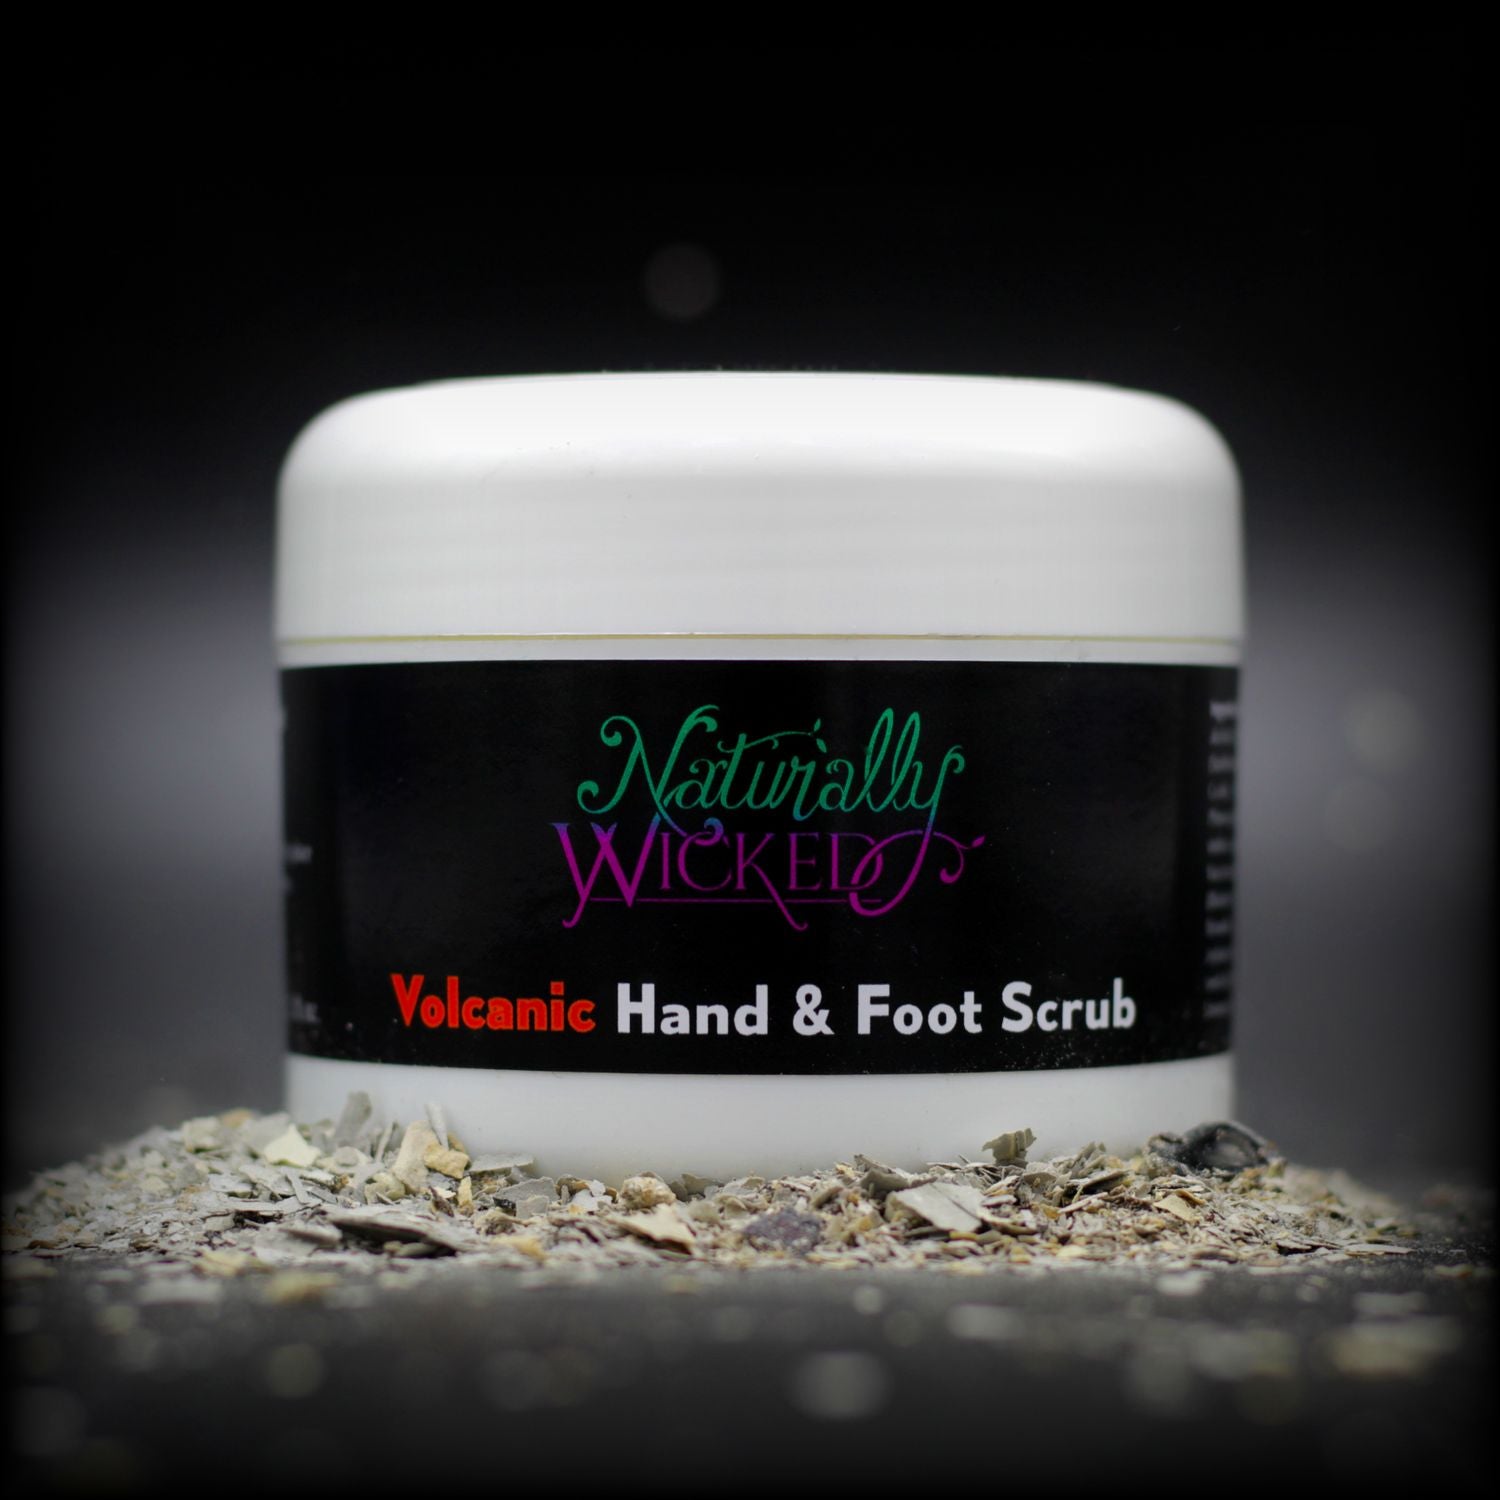 Naturally Wicked Volcanic Hand & Foot Scrub Sat In White Volcanic Ash